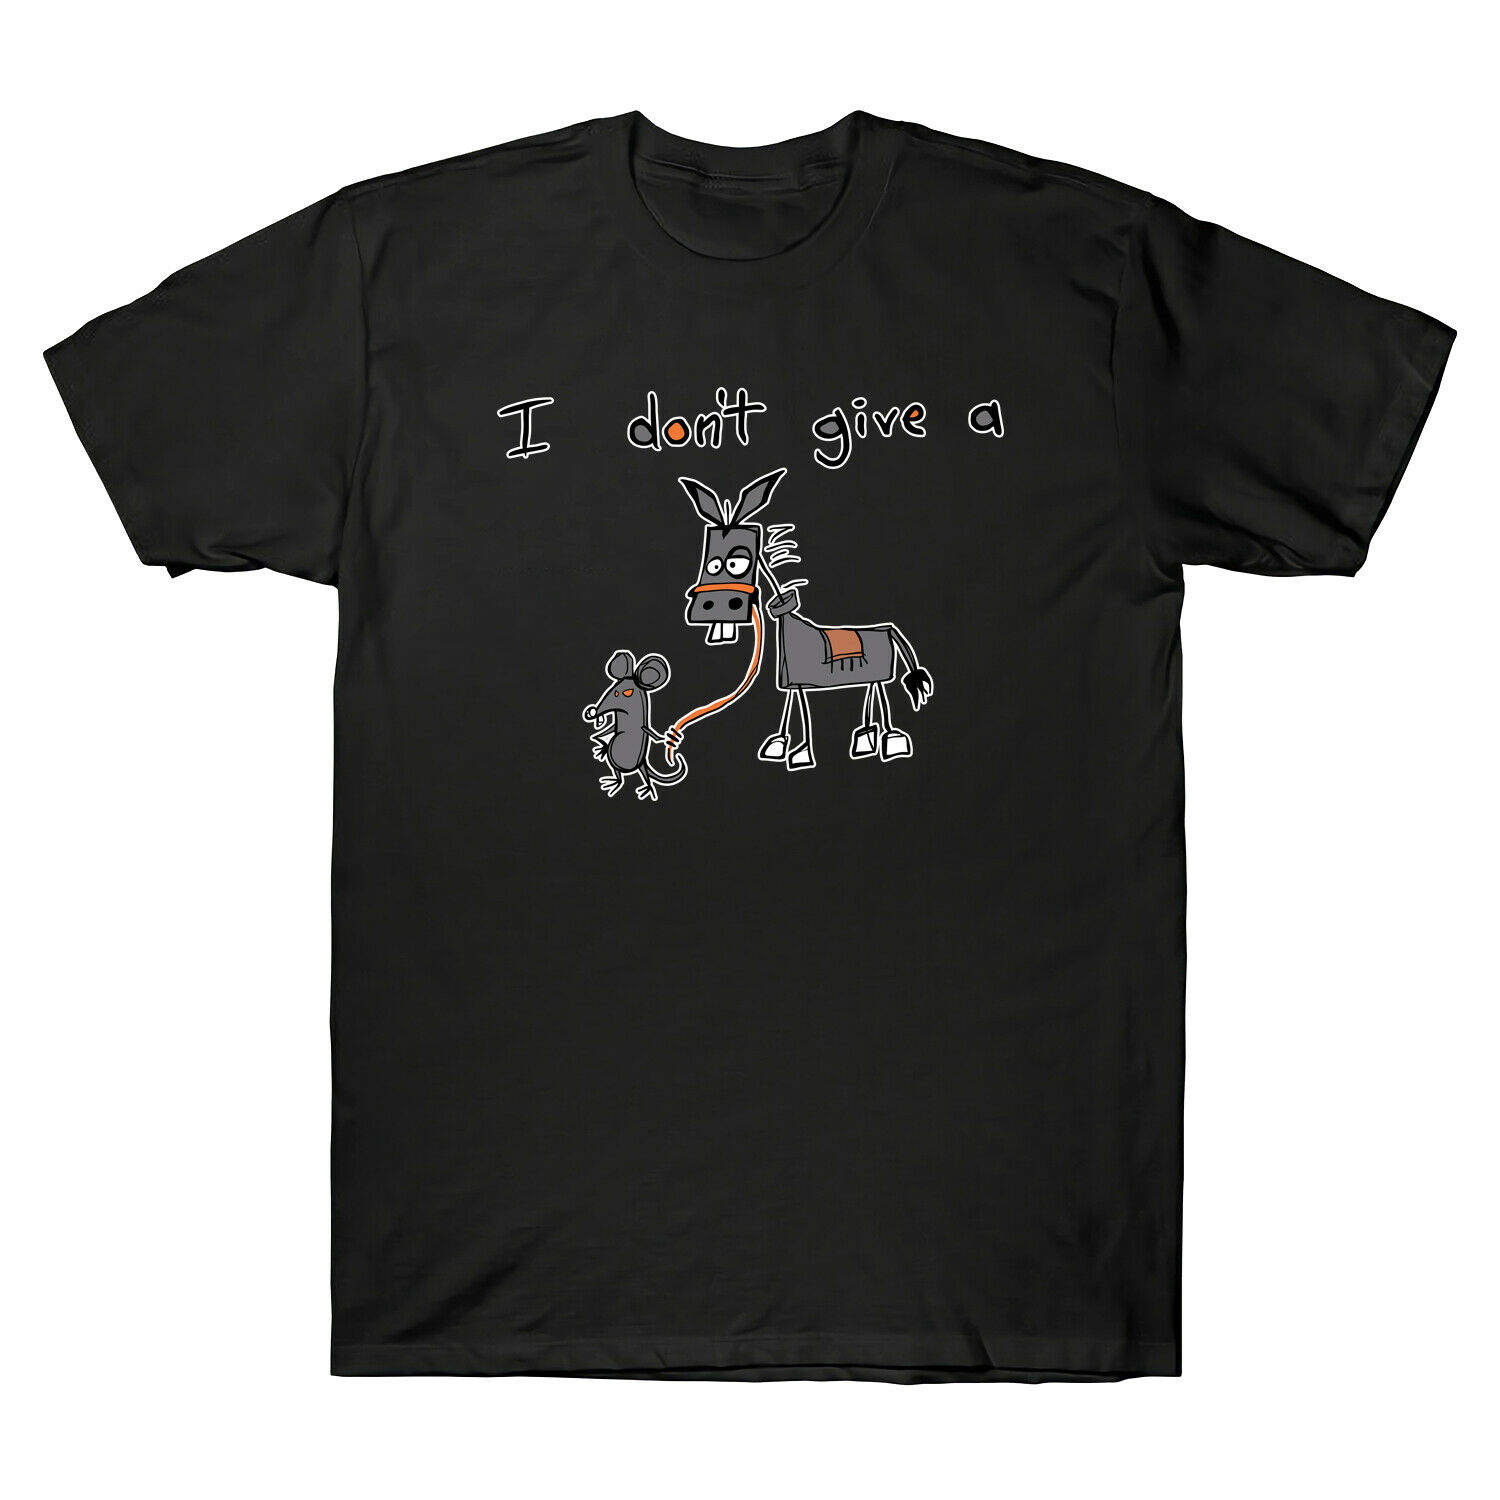 I don't give a rat's ass shirt, sweater, hoodie and ladies tee